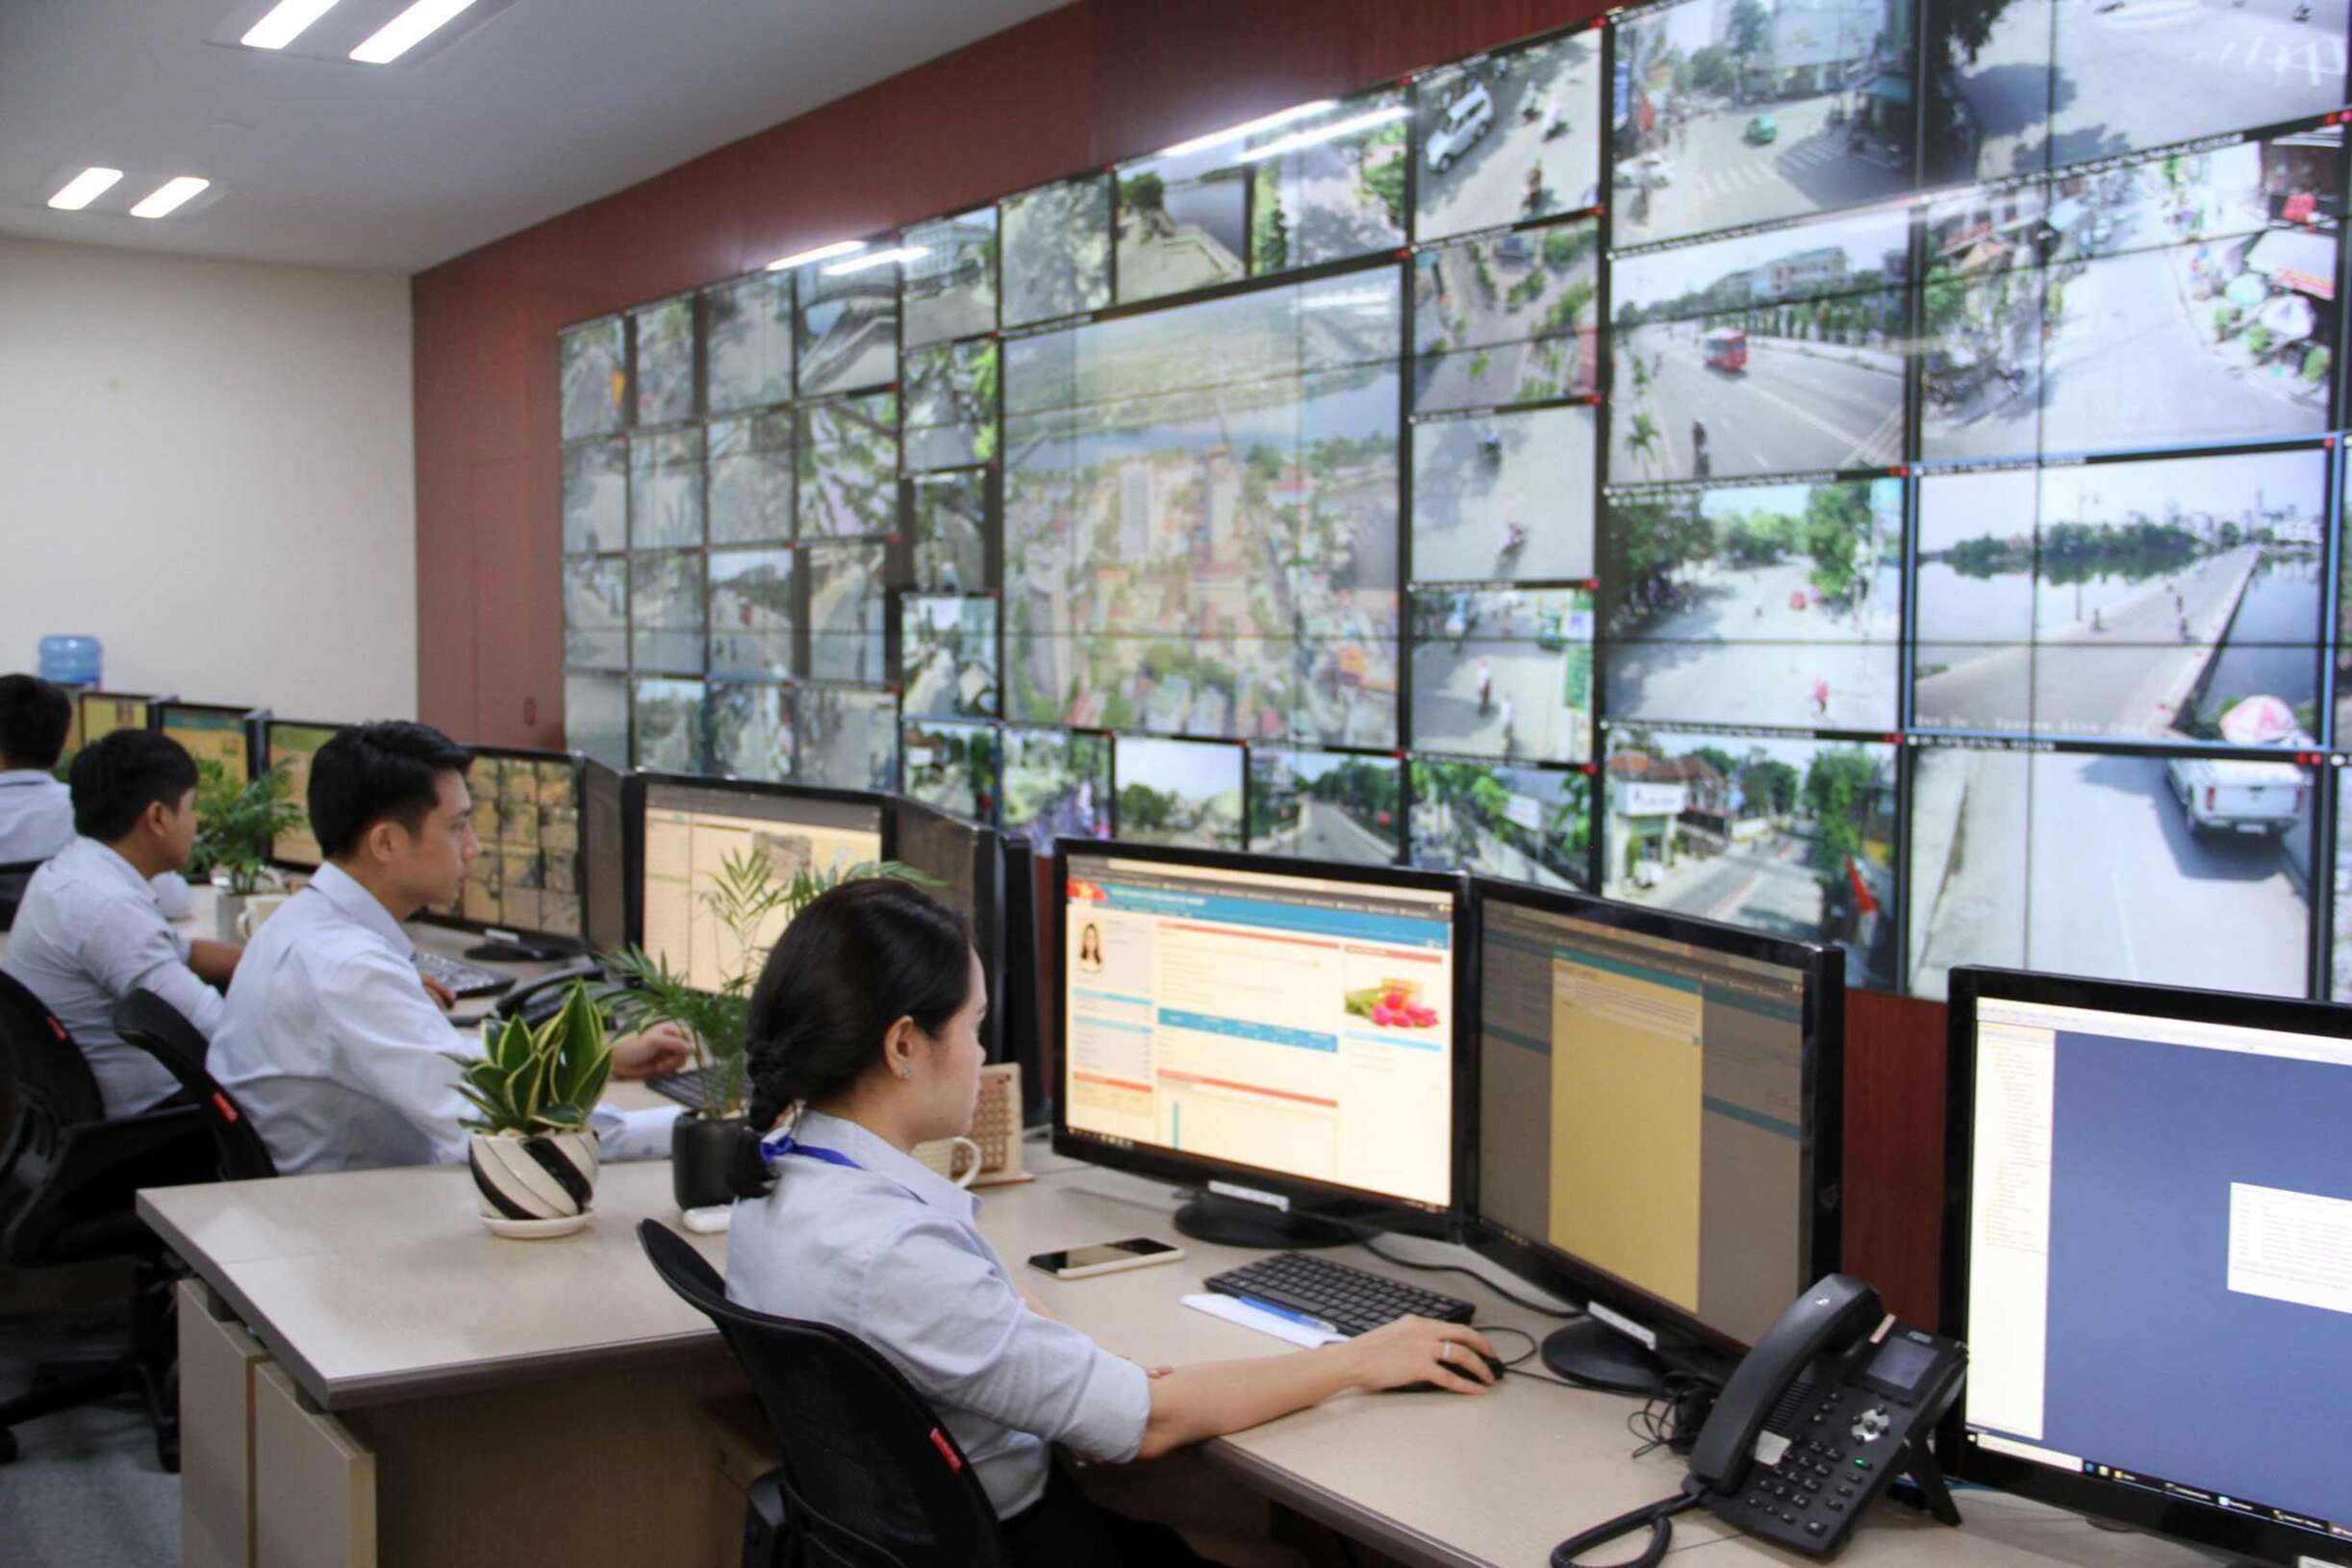 hue-residents-take-active-role-in-building-smart-city.jpg